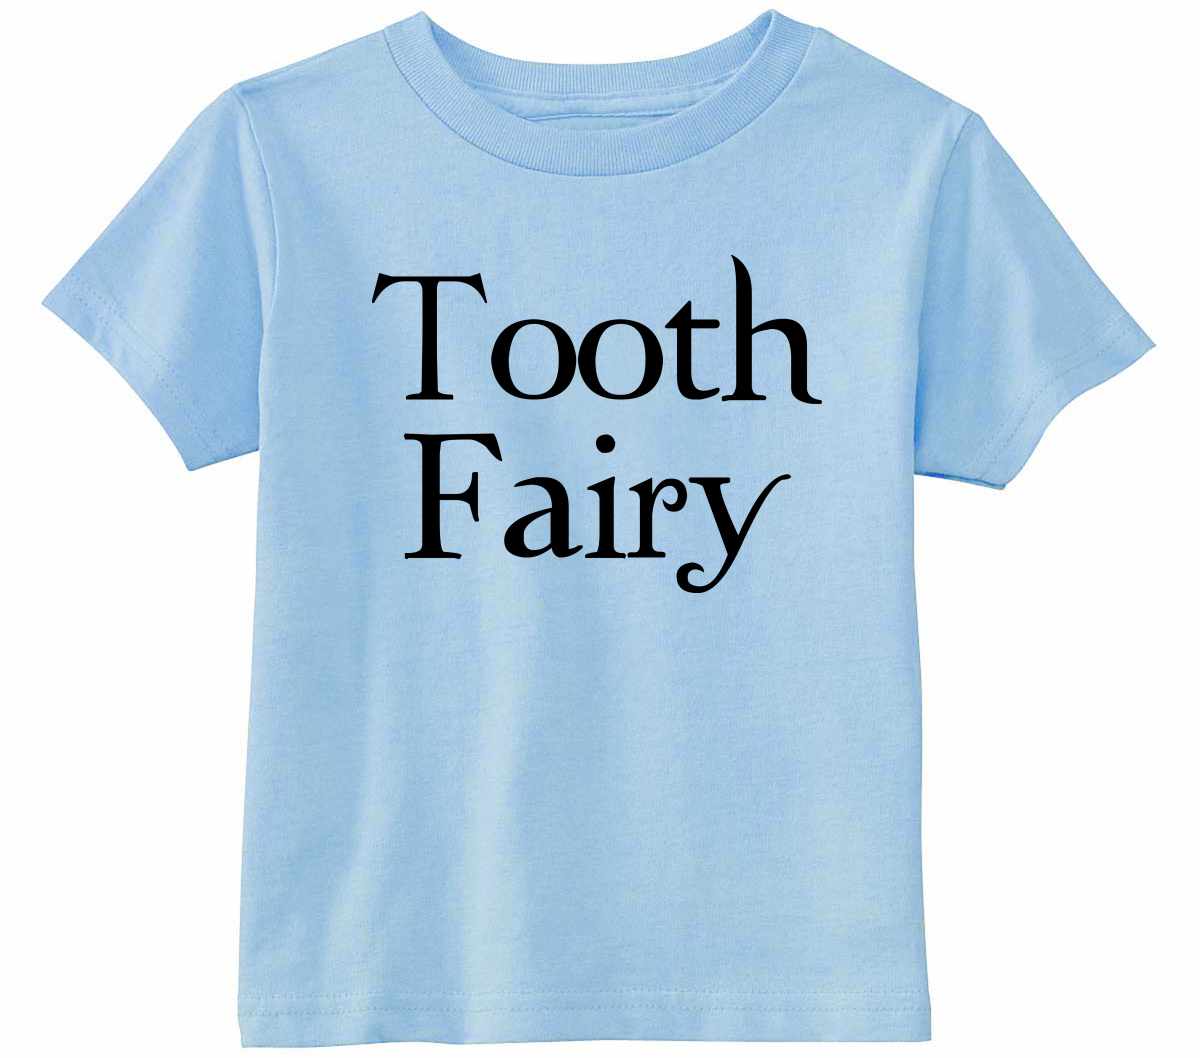 Tooth Fairy on Infant-Toddler T-Shirt (#680-7)